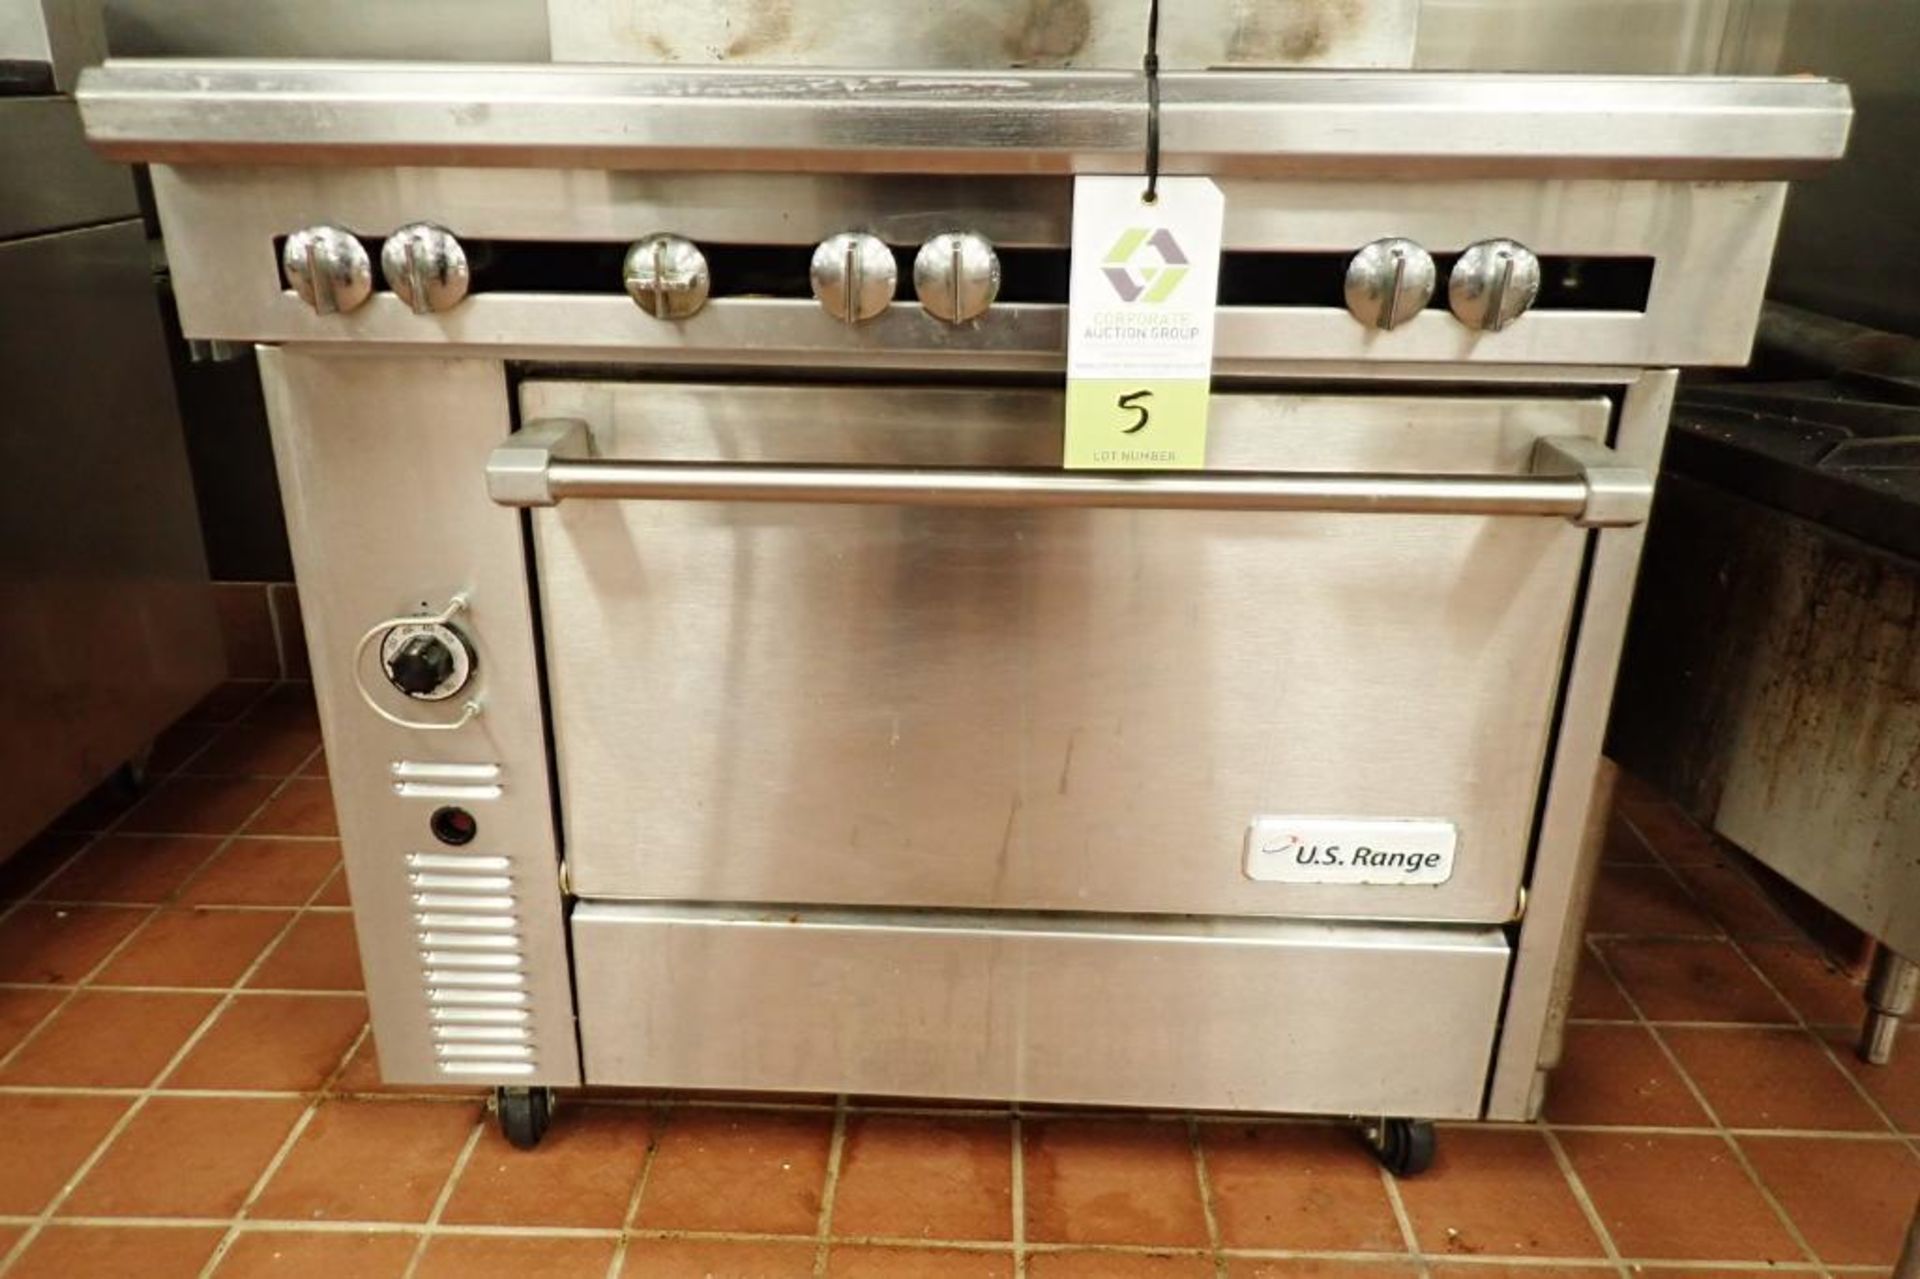 US Range six burner standard oven, Model C836-6, natural gas, 36 in. wide x 39 in. deep x 41 in. tal - Image 3 of 4